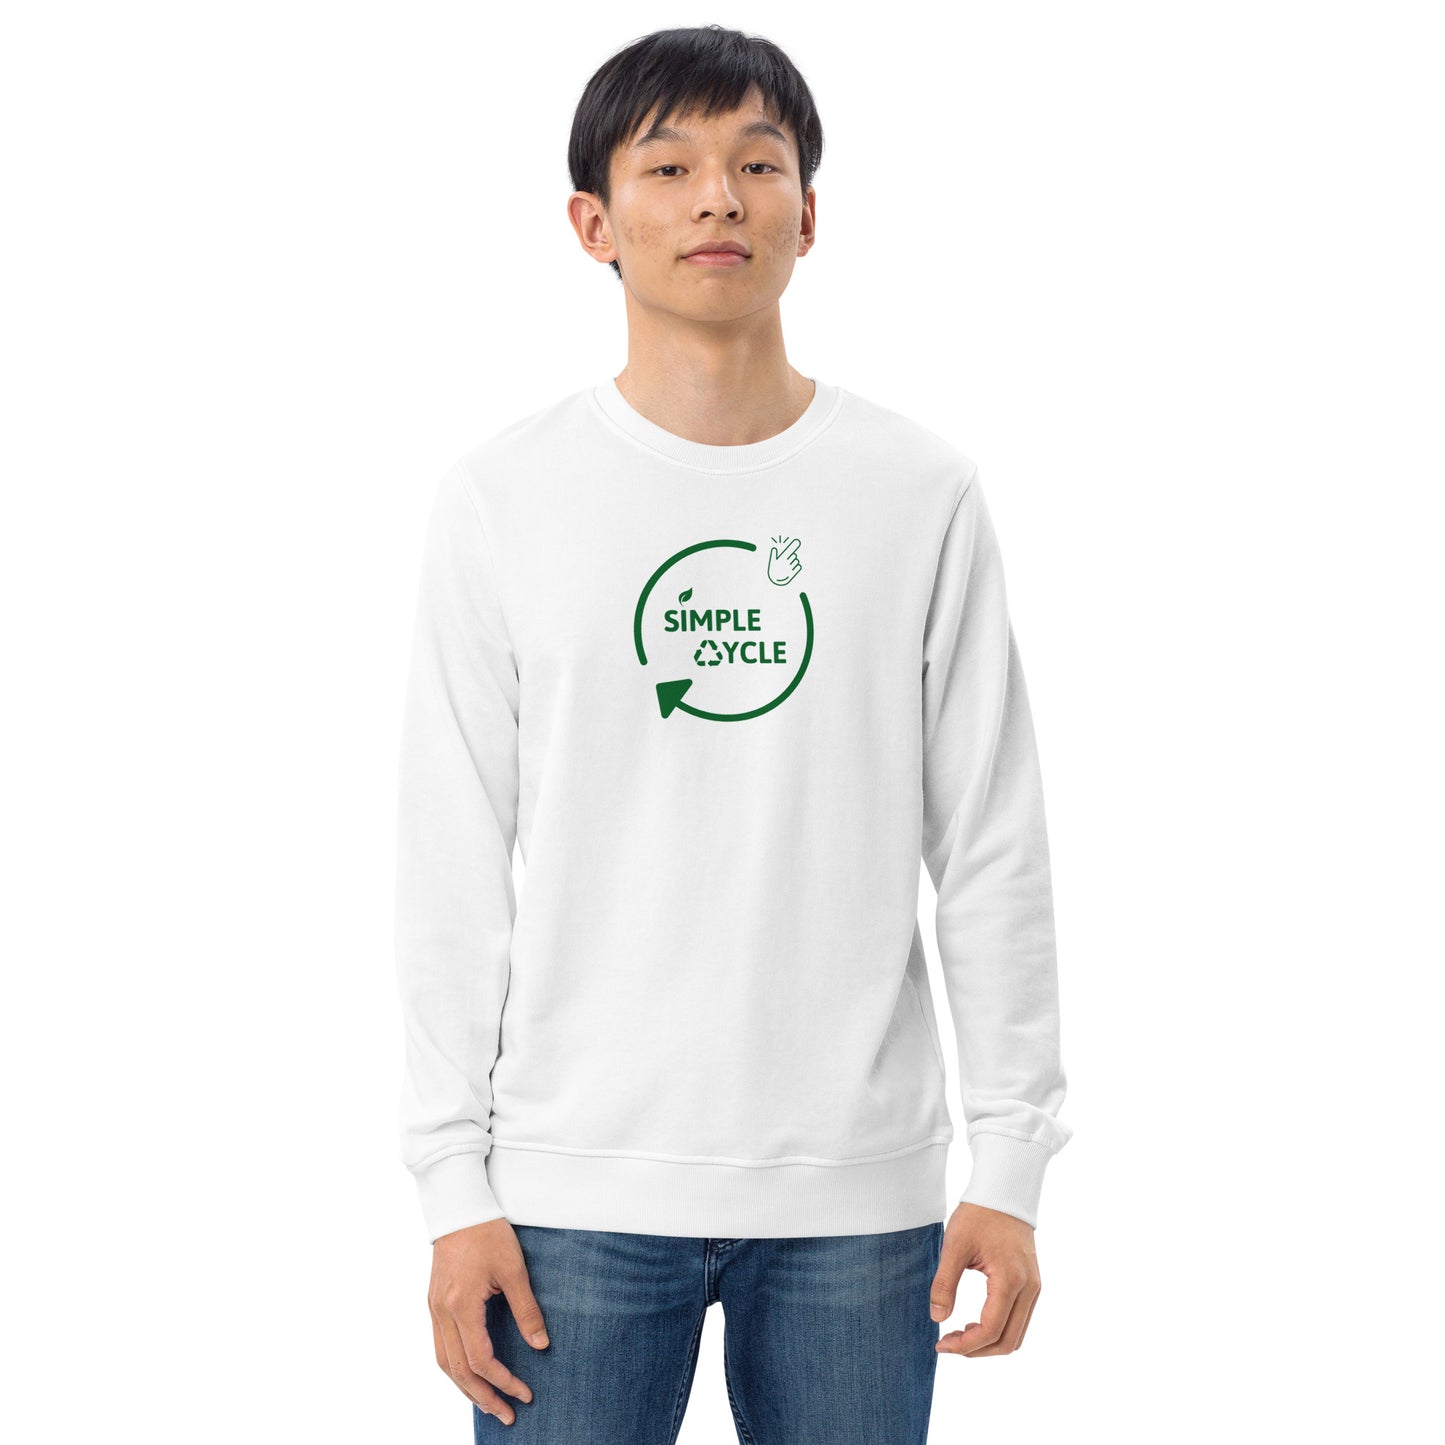 SimpleCycle Branded Unisex Organic Sweatshirt White front view